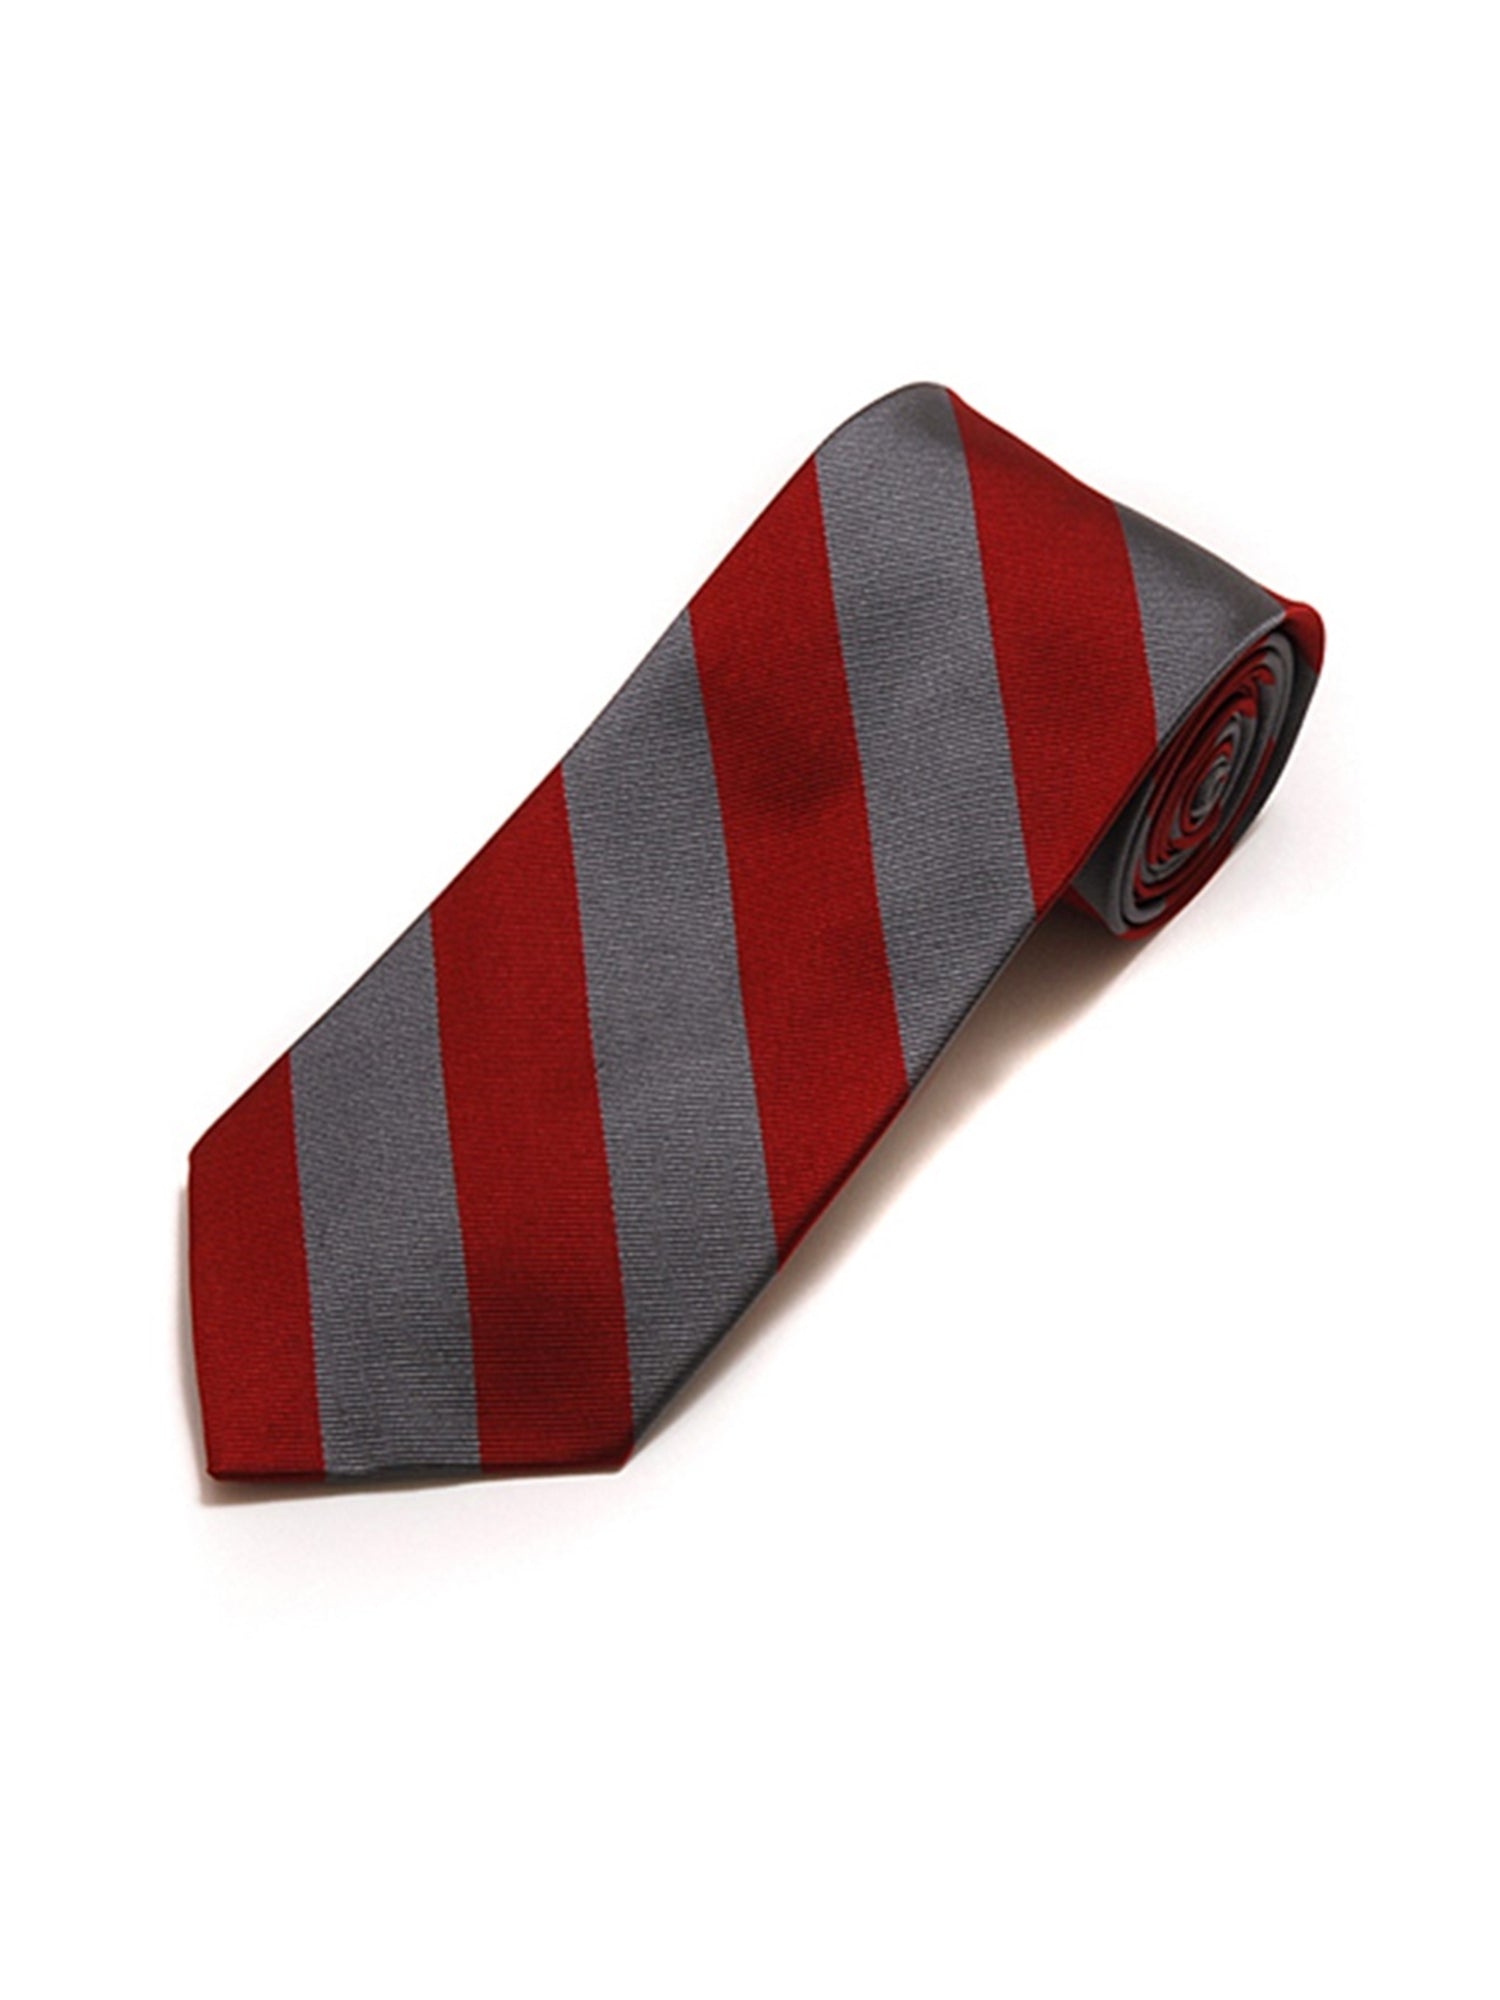 Men's College Striped Colored Silk Long Or X-Long Neck Tie Neck Tie TheDapperTie Burgundy & Charcoal 57" long & 3.25" wide 